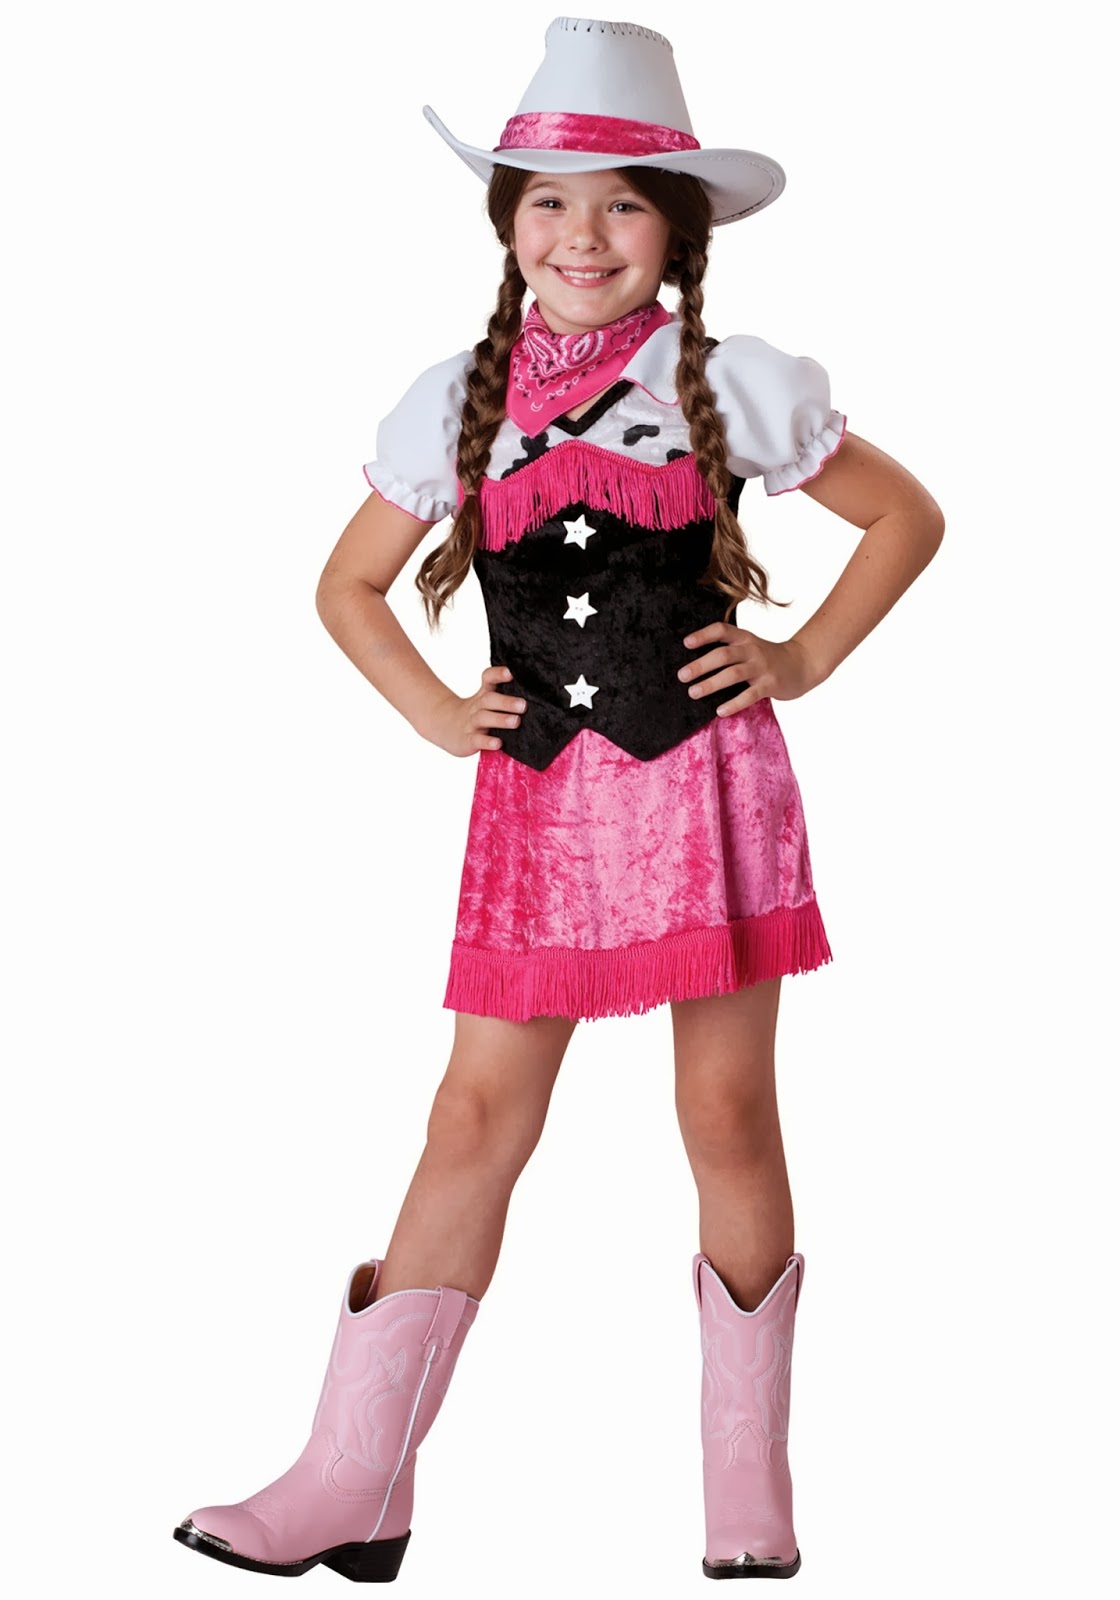 Sheriff Callie's Wild West Costumes: Sheriff Callie Complete Costume Ideas